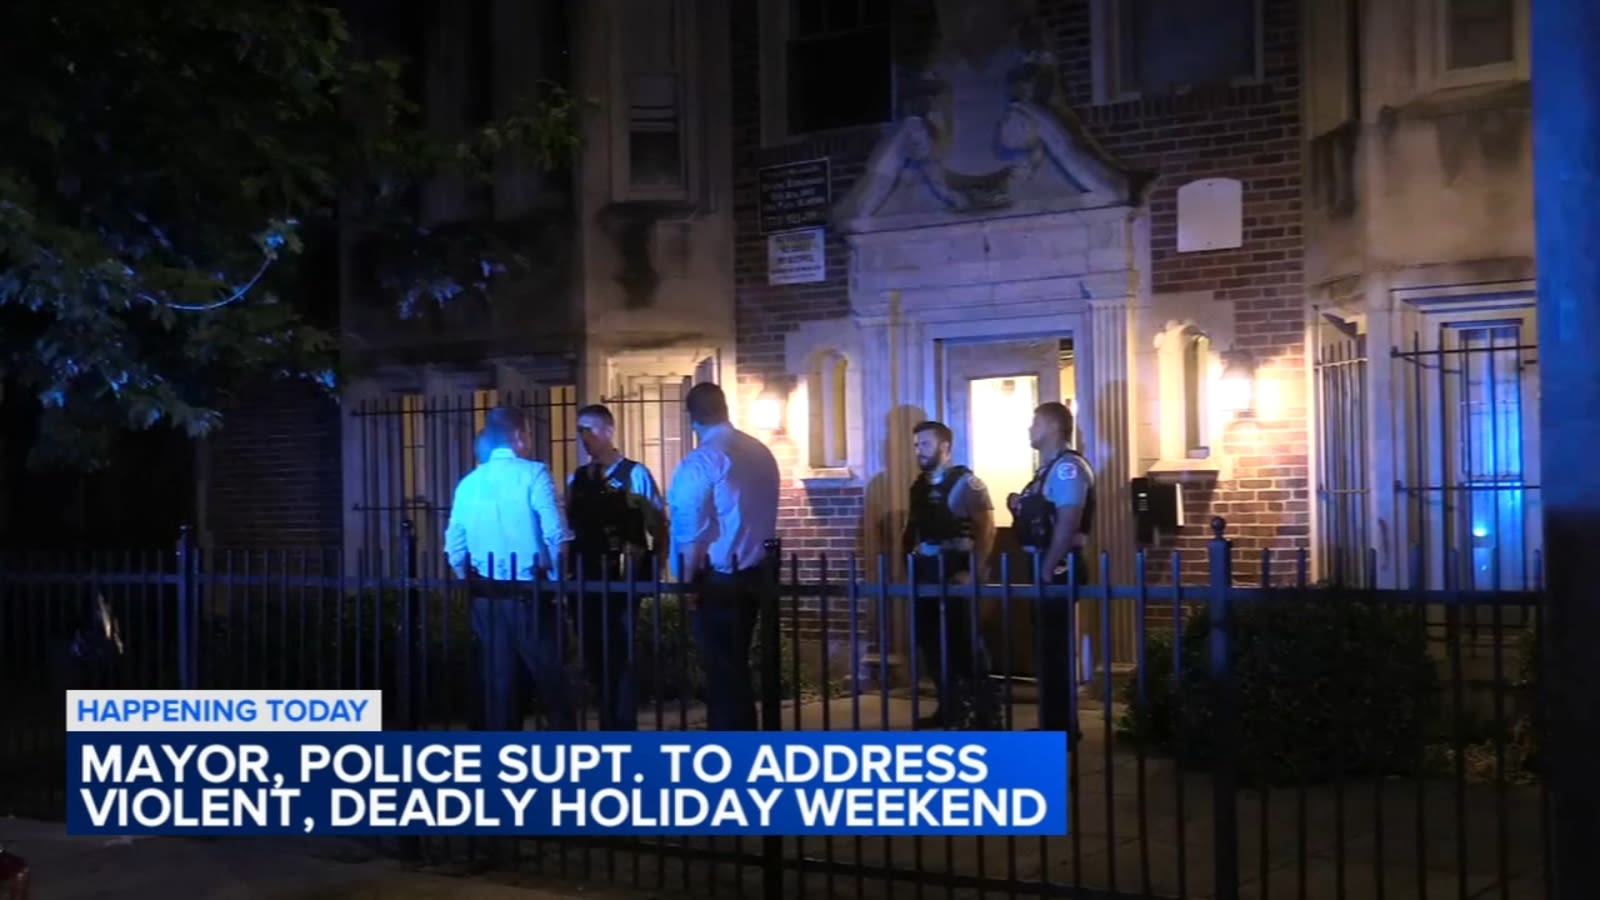 Chicago shootings: 109 shot, 19 fatally, in citywide holiday weekend gun violence, CPD says